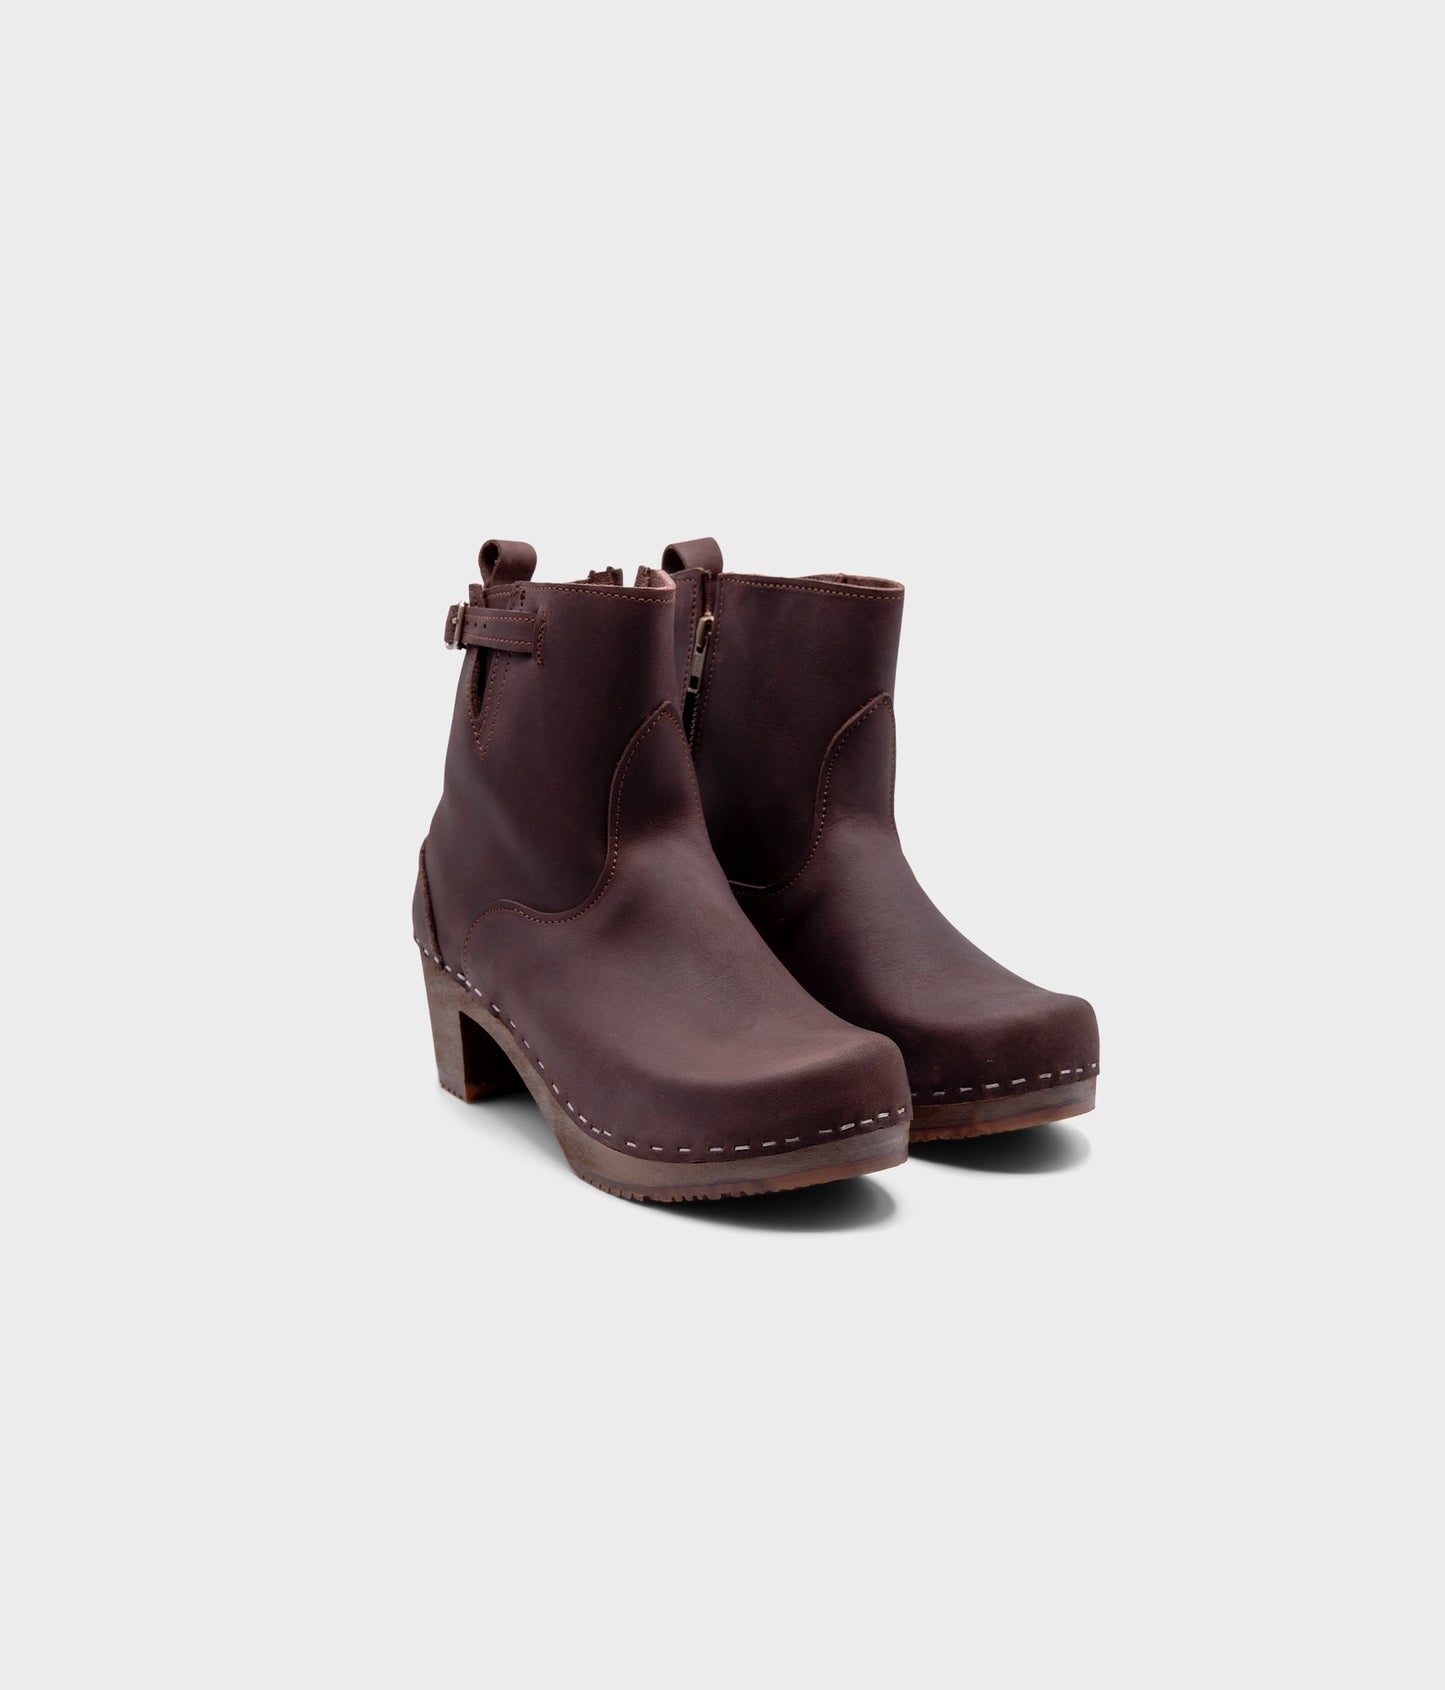 high-heeled clog boots in dark brown nubuck leather stapled on a dark wooden base with a silver buckle